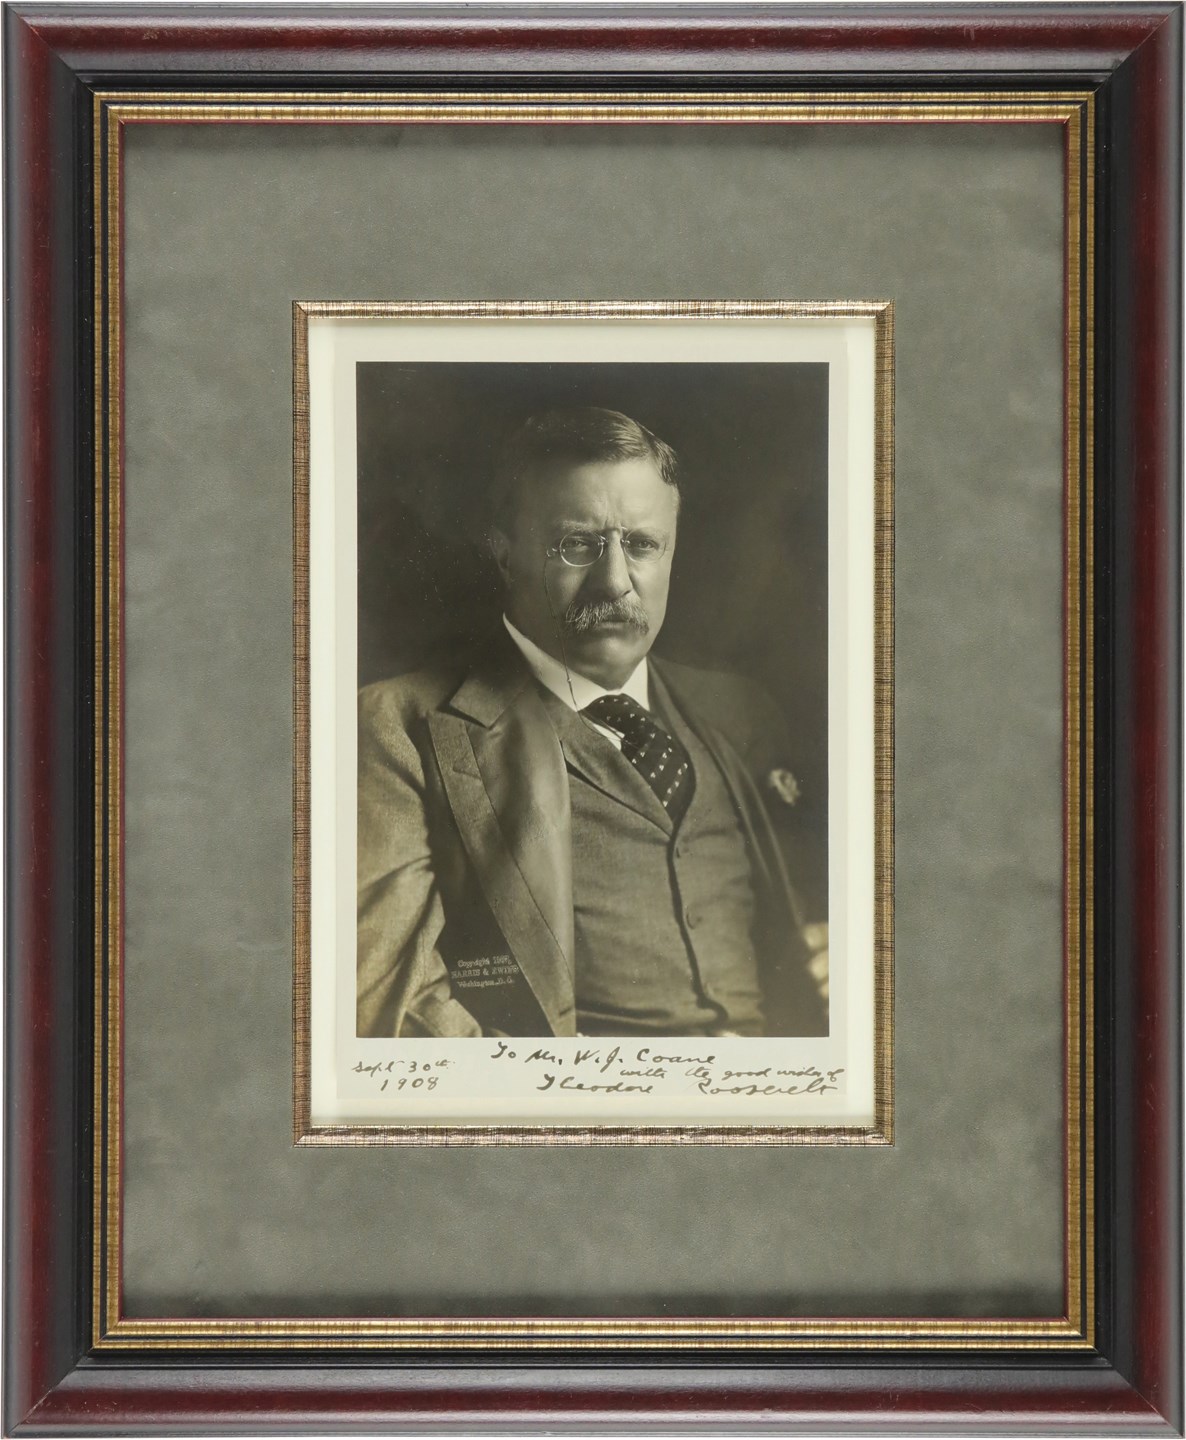 Historical Autographs - Gorgeous 1908 Theodore Roosevelt Signed Photograph as President (PSA)